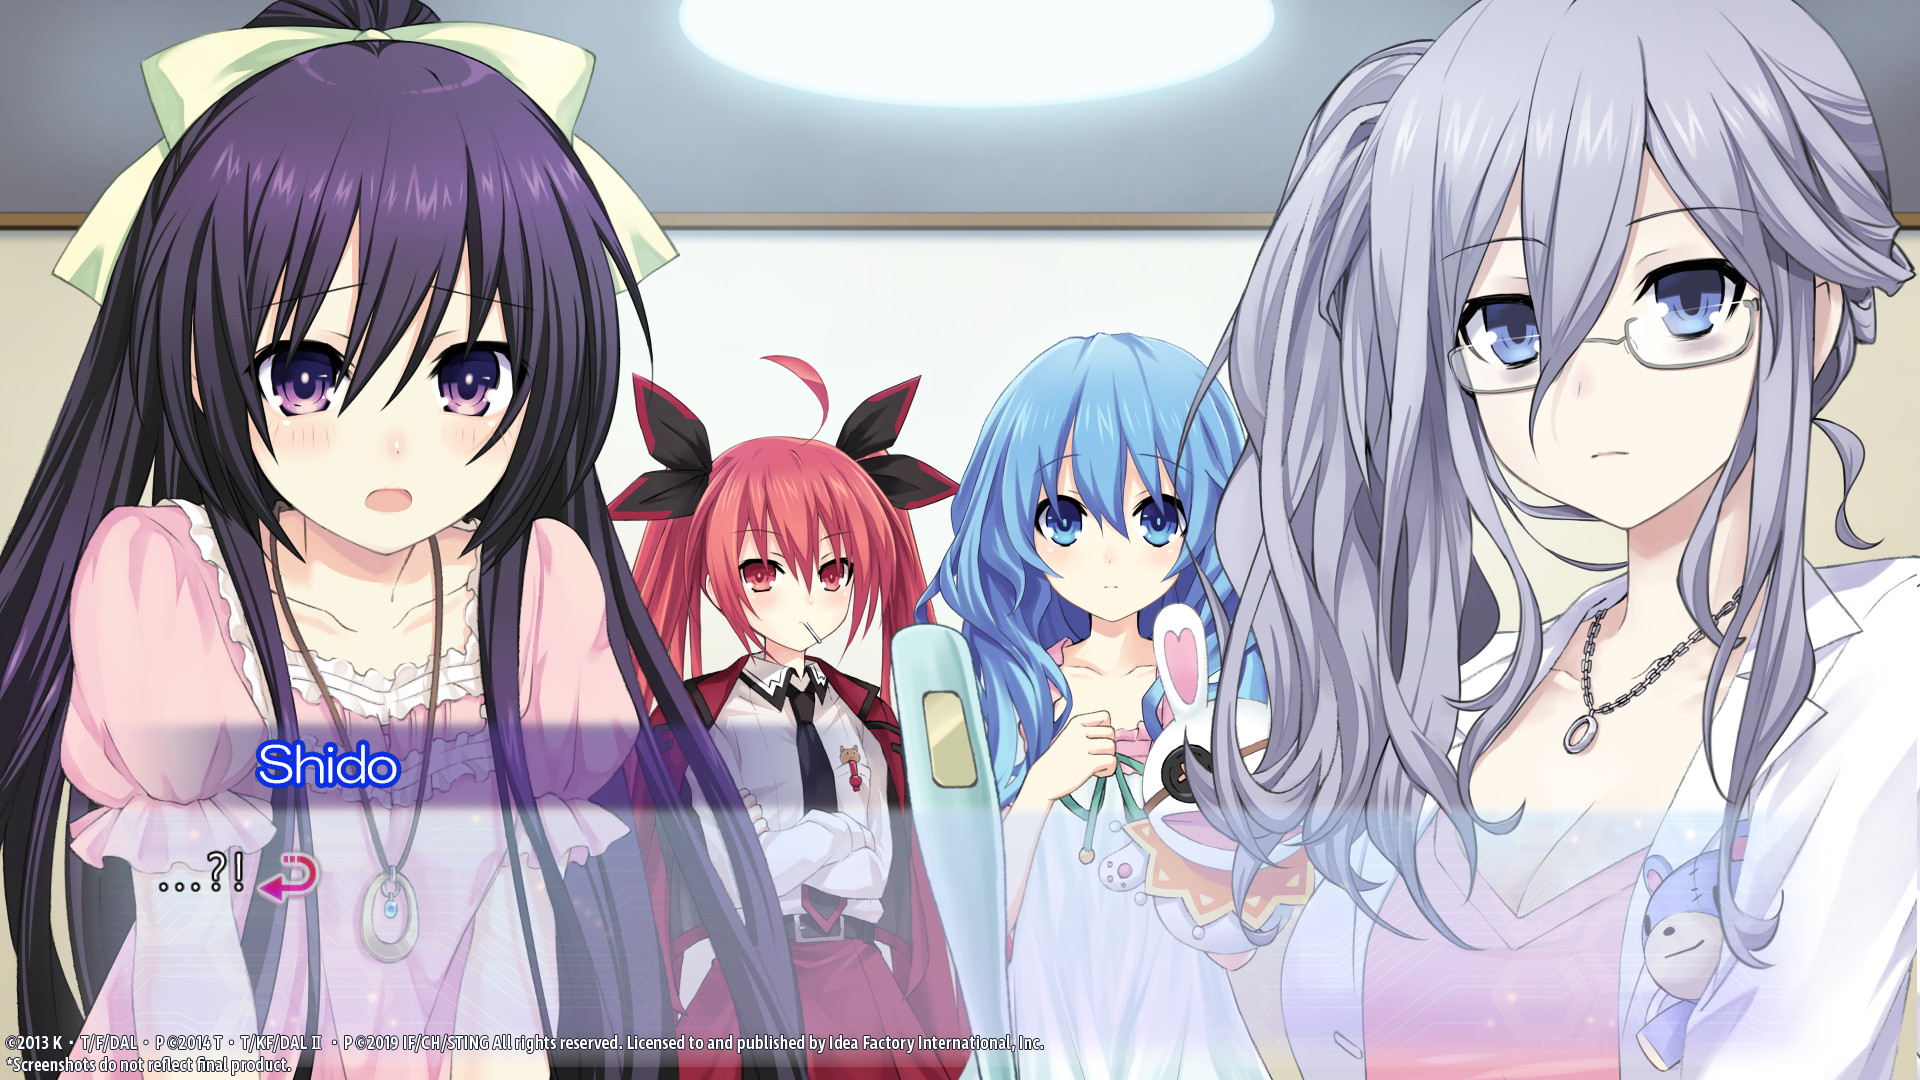 Date A Live: Spirit Pledge - Ultimate Review of the Gameplay